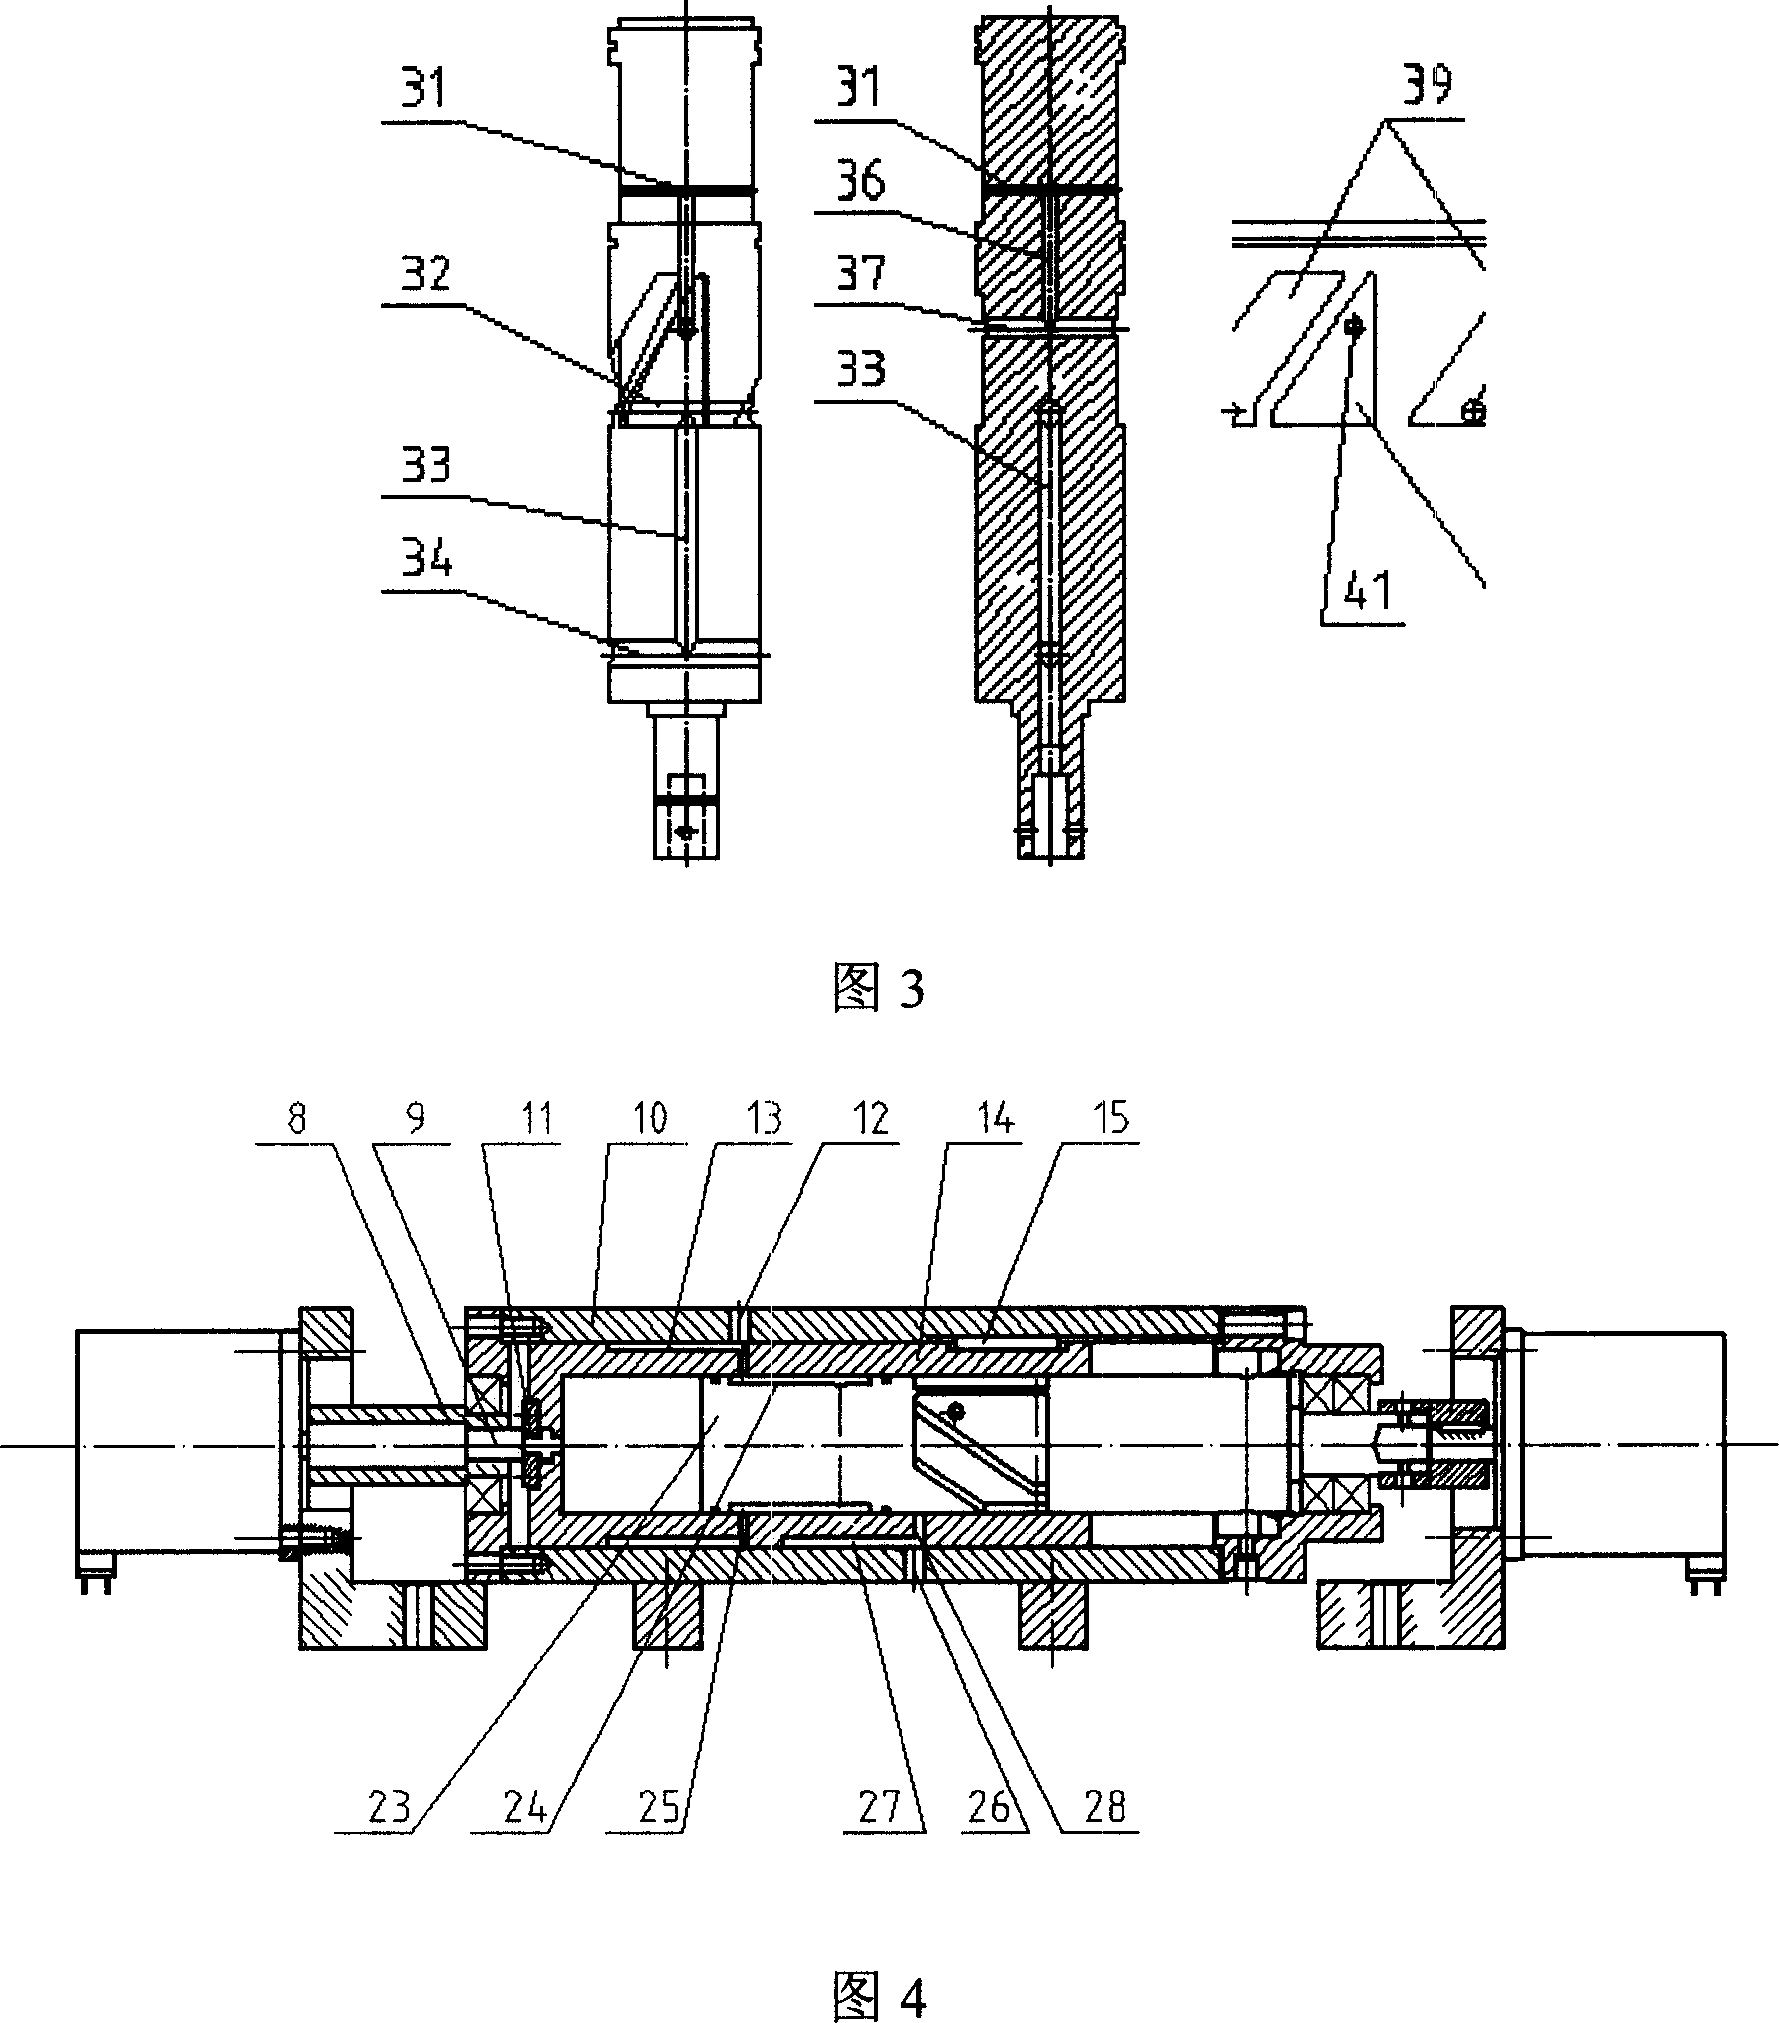 Device for lifting piston compressor air inlet valve based on time control